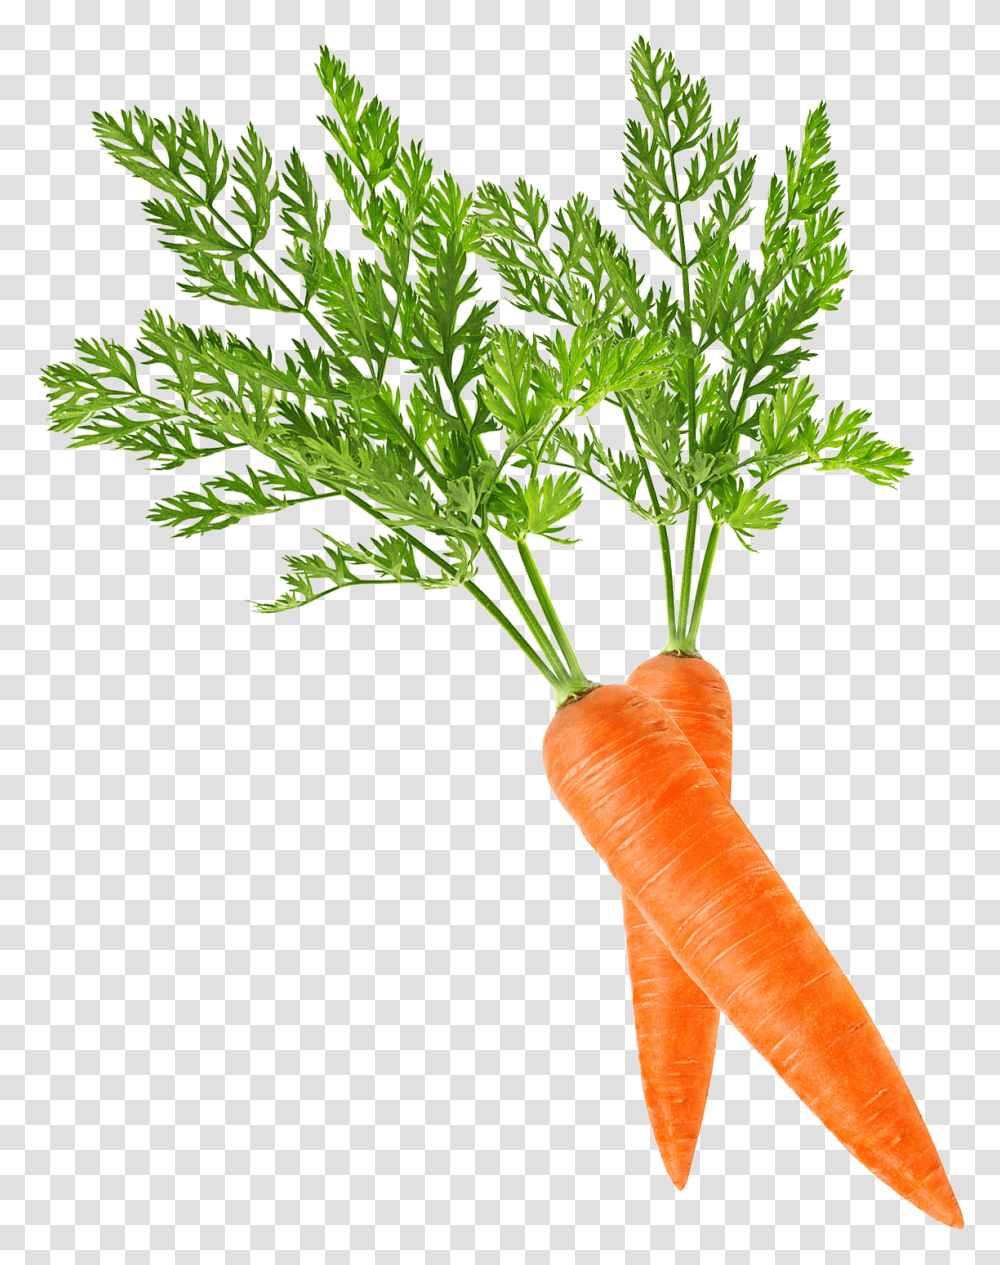 Baby Carrot Clip Art Carrot, Plant, Vegetable, Food, Produce Transparent Png